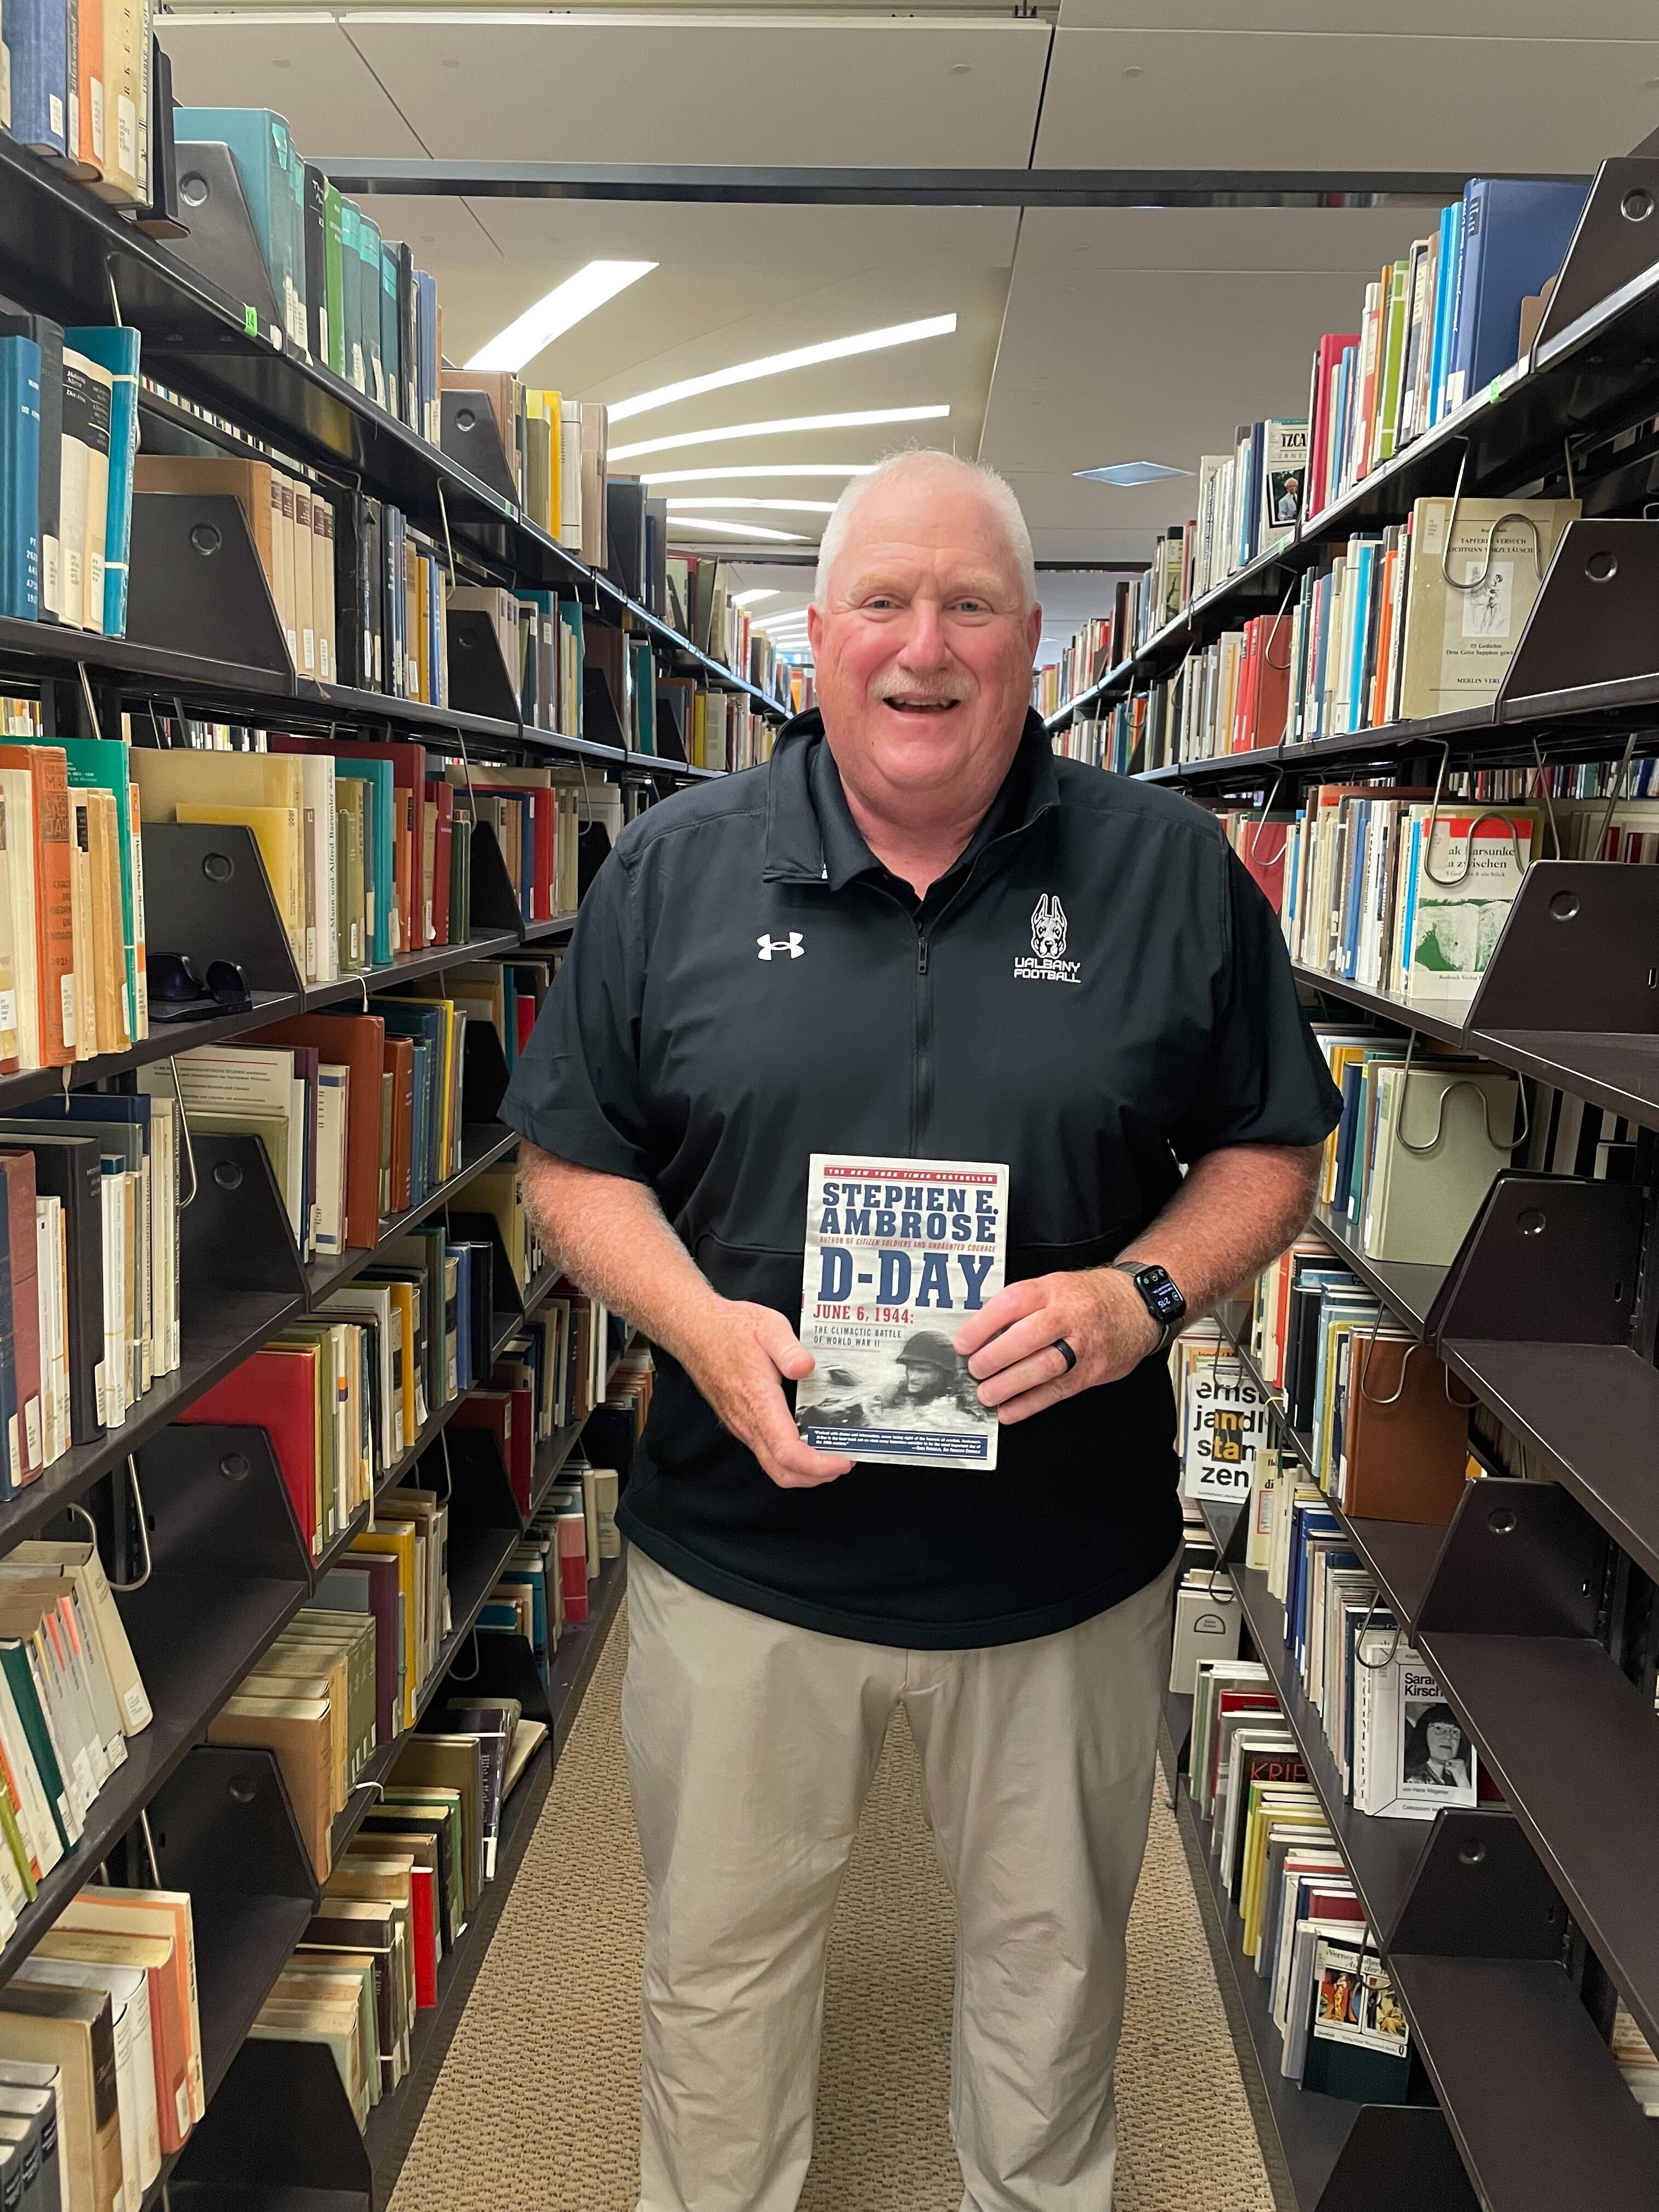 Coach Gattuso with D-Day by Stephen Ambrose